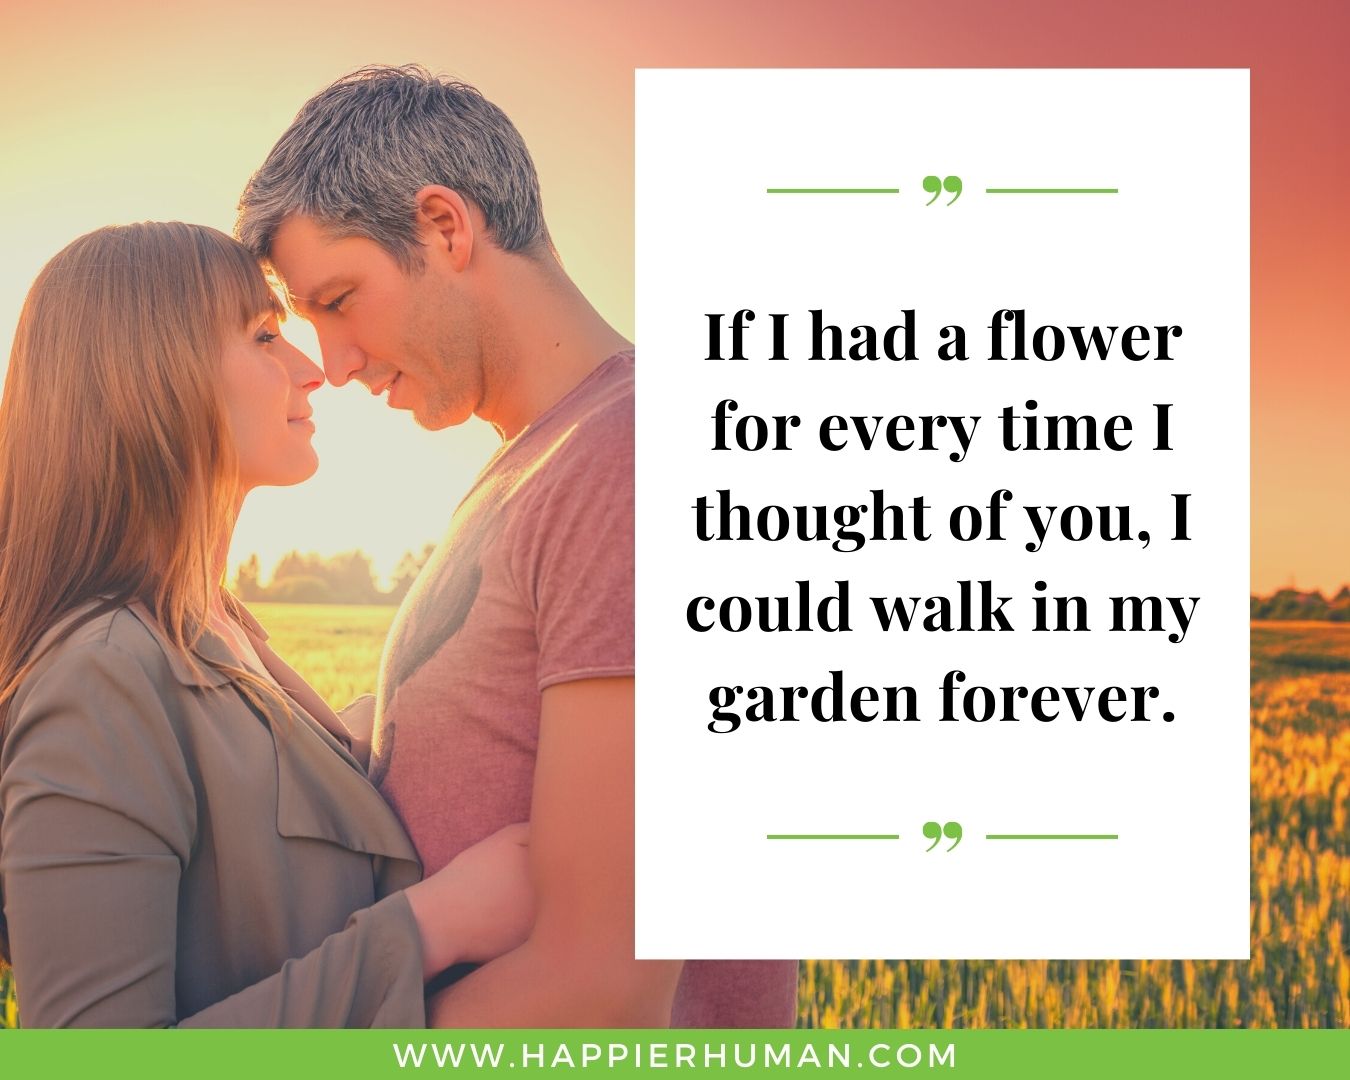 Funny Love Quotes for Her - “If I had a flower for every time I thought of you, I could walk in my garden forever.”